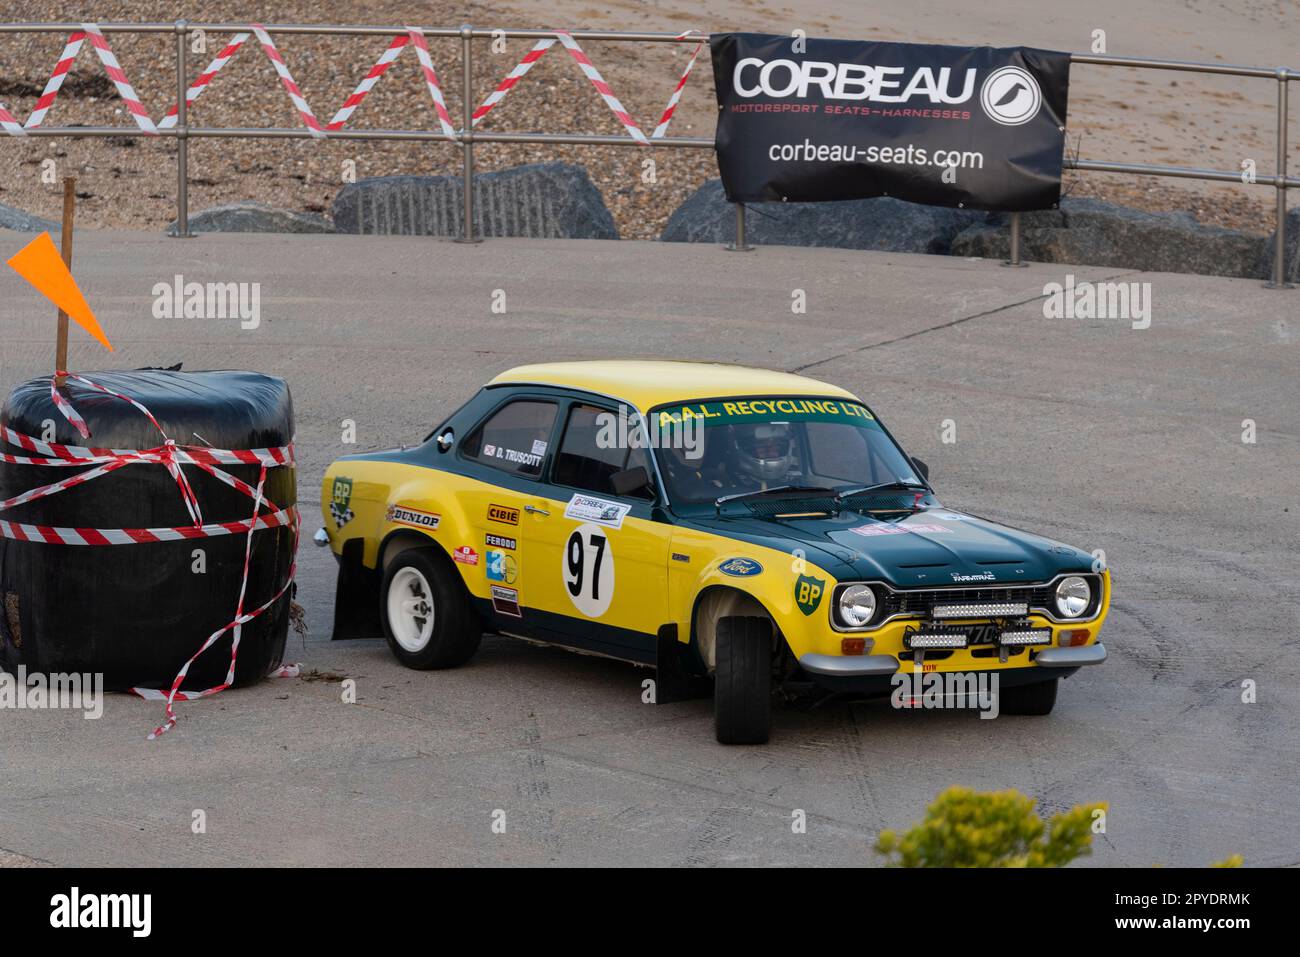 Dave Truscott racing a classic 1972 Ford Escort Mk1 competing in the Corbeau Seats rally on the seafront at Clacton, Essex, UK. Co driver Andy Simpson Stock Photo